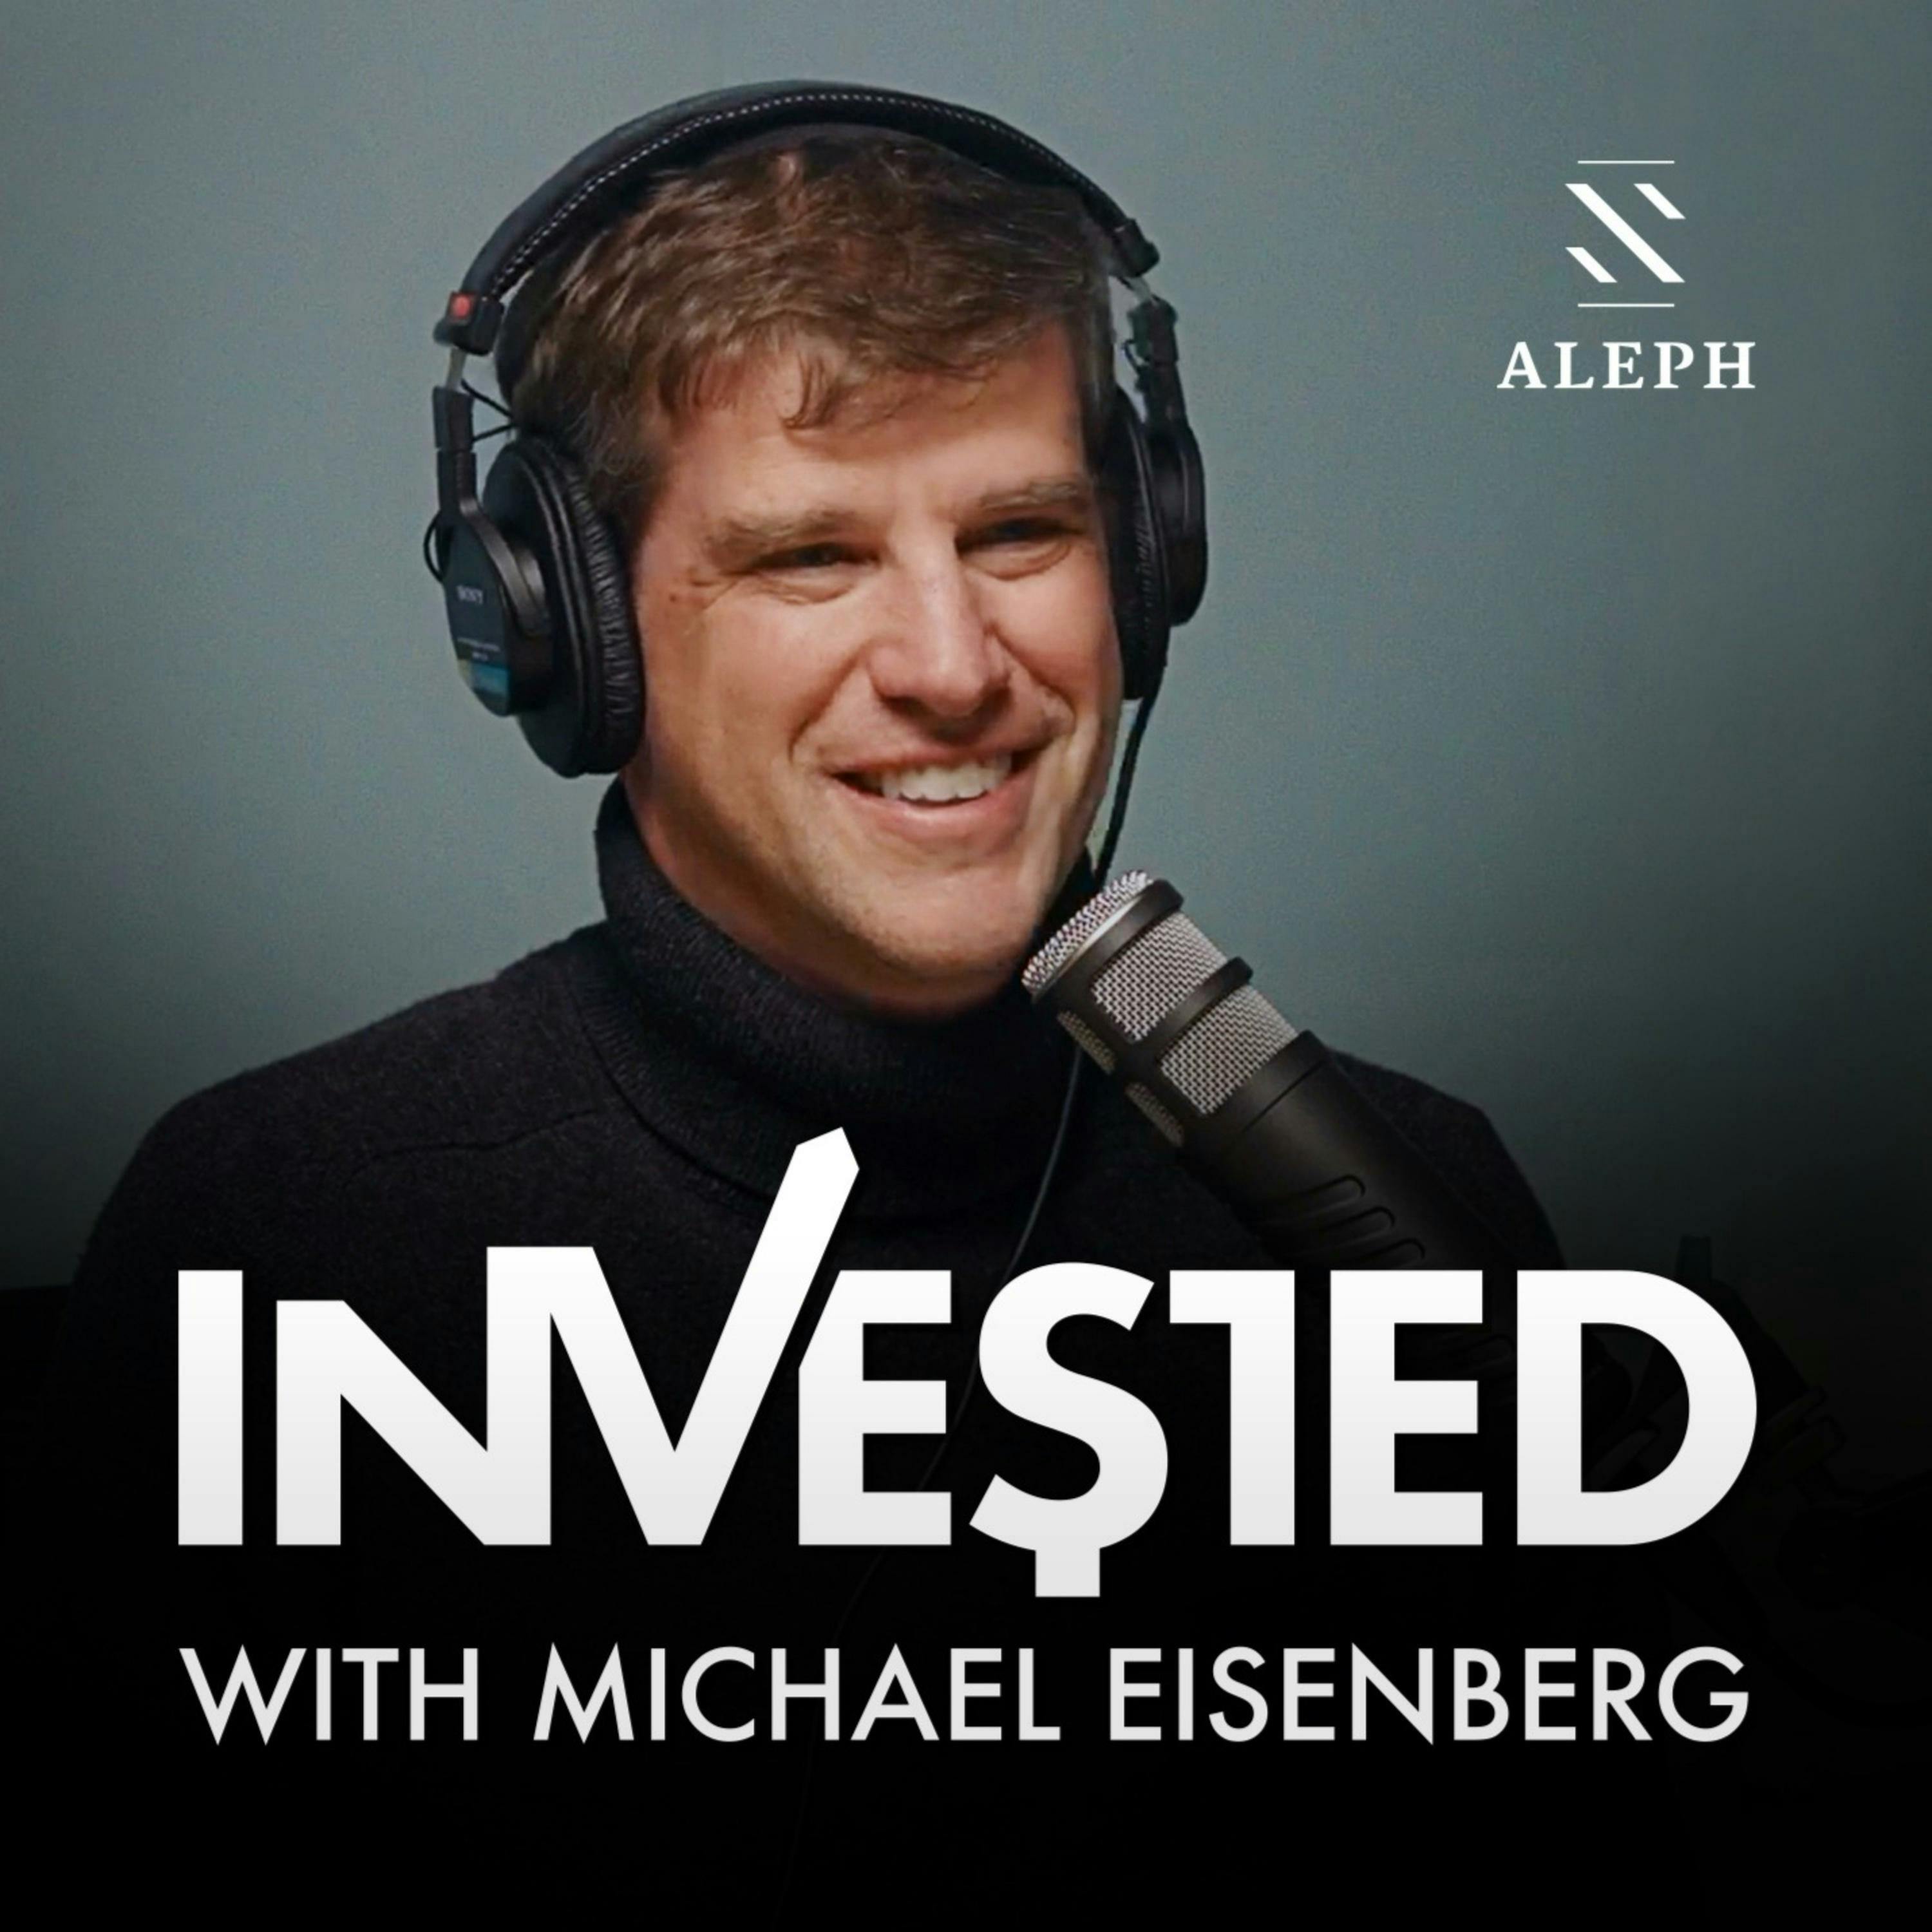 Invested by Aleph